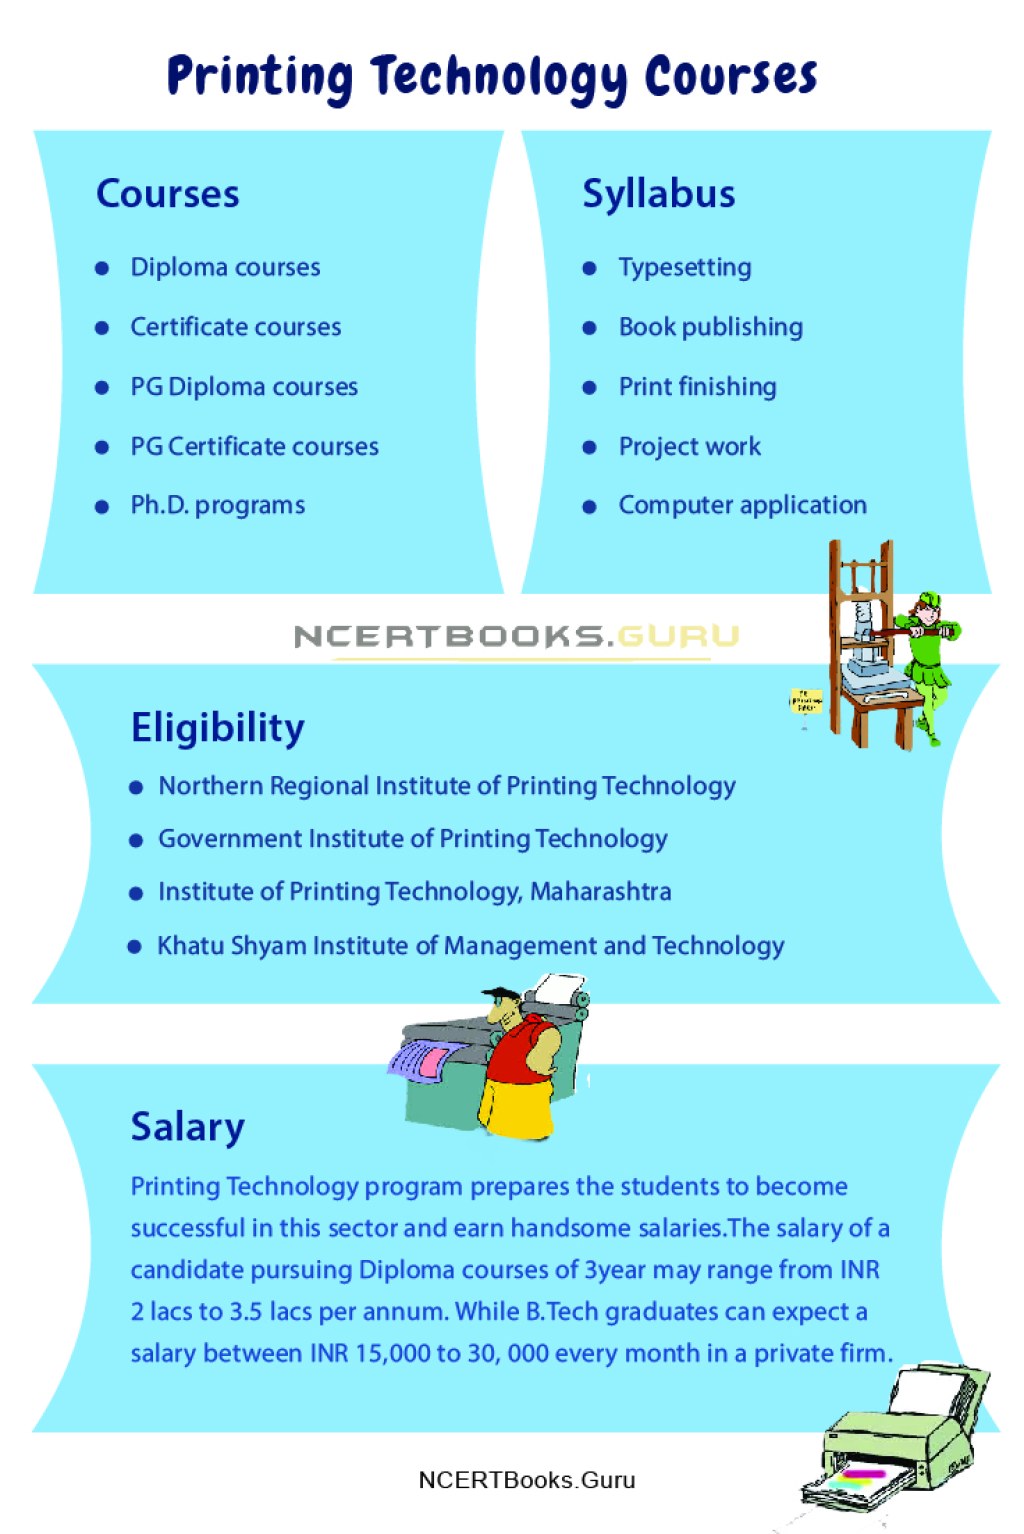 printing technology bachelor degree - Printing Technology Courses online  Fees, Duration, Salary